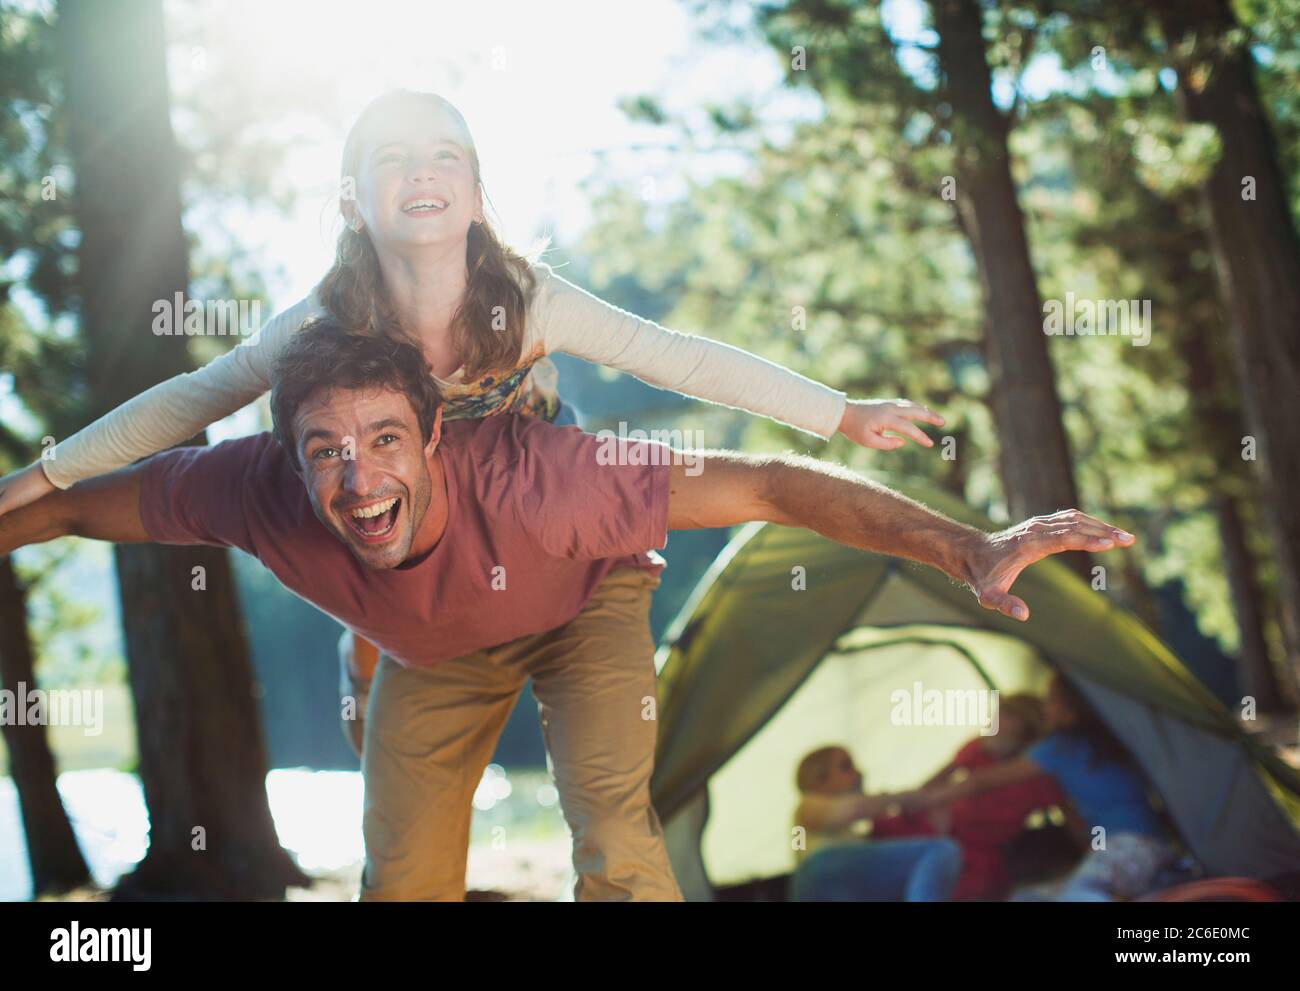 Exuberant father carrying daughter on back in woods Stock Photo